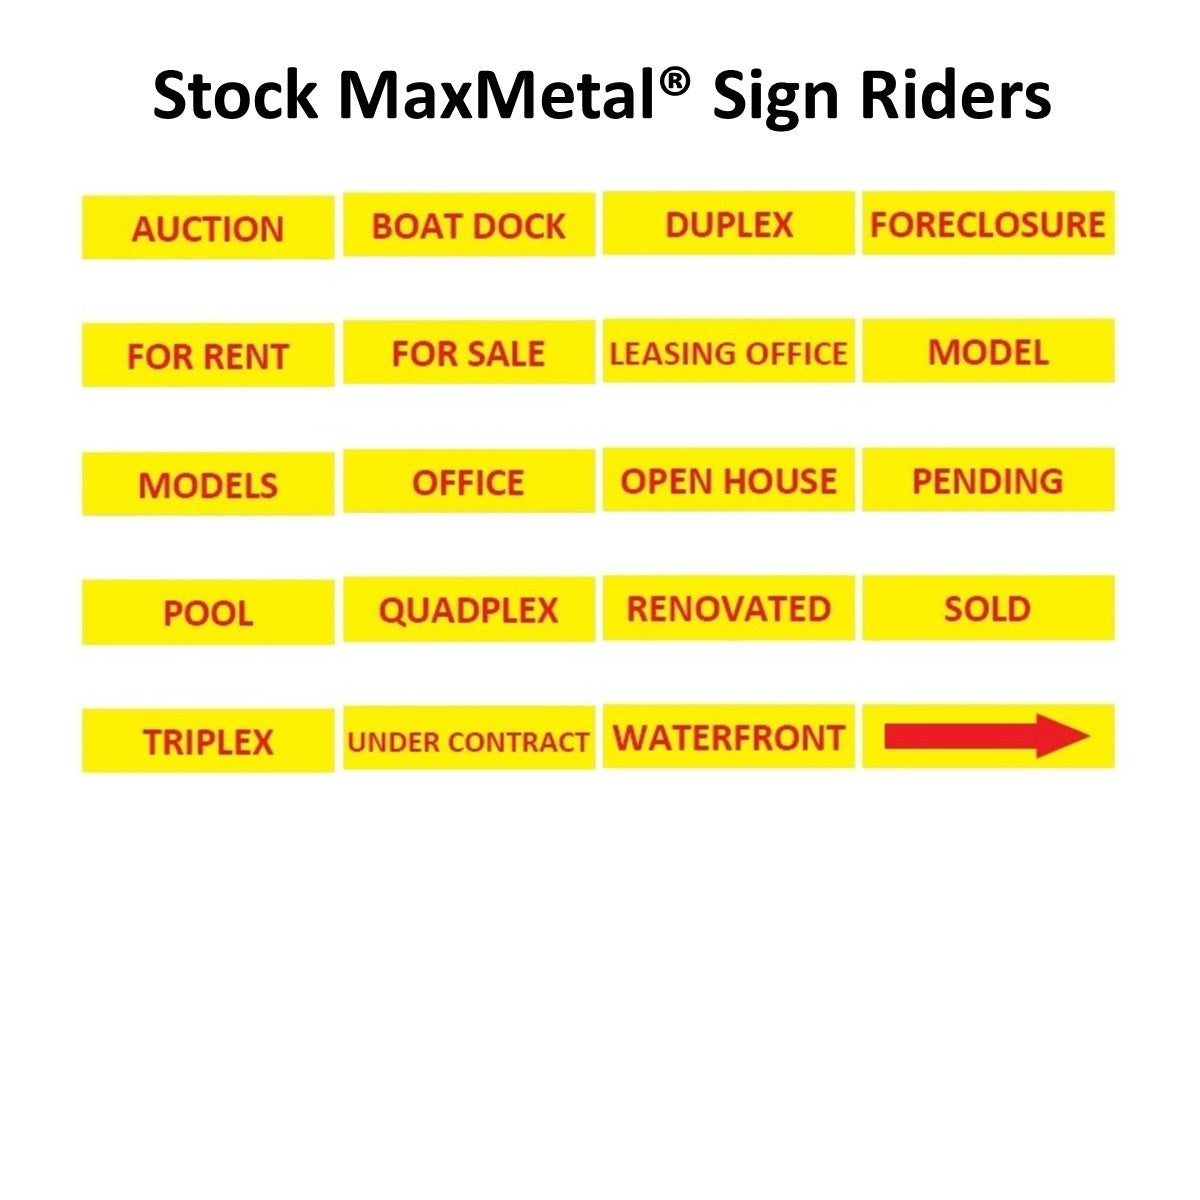 Stock MaxMetal® Sign Riders